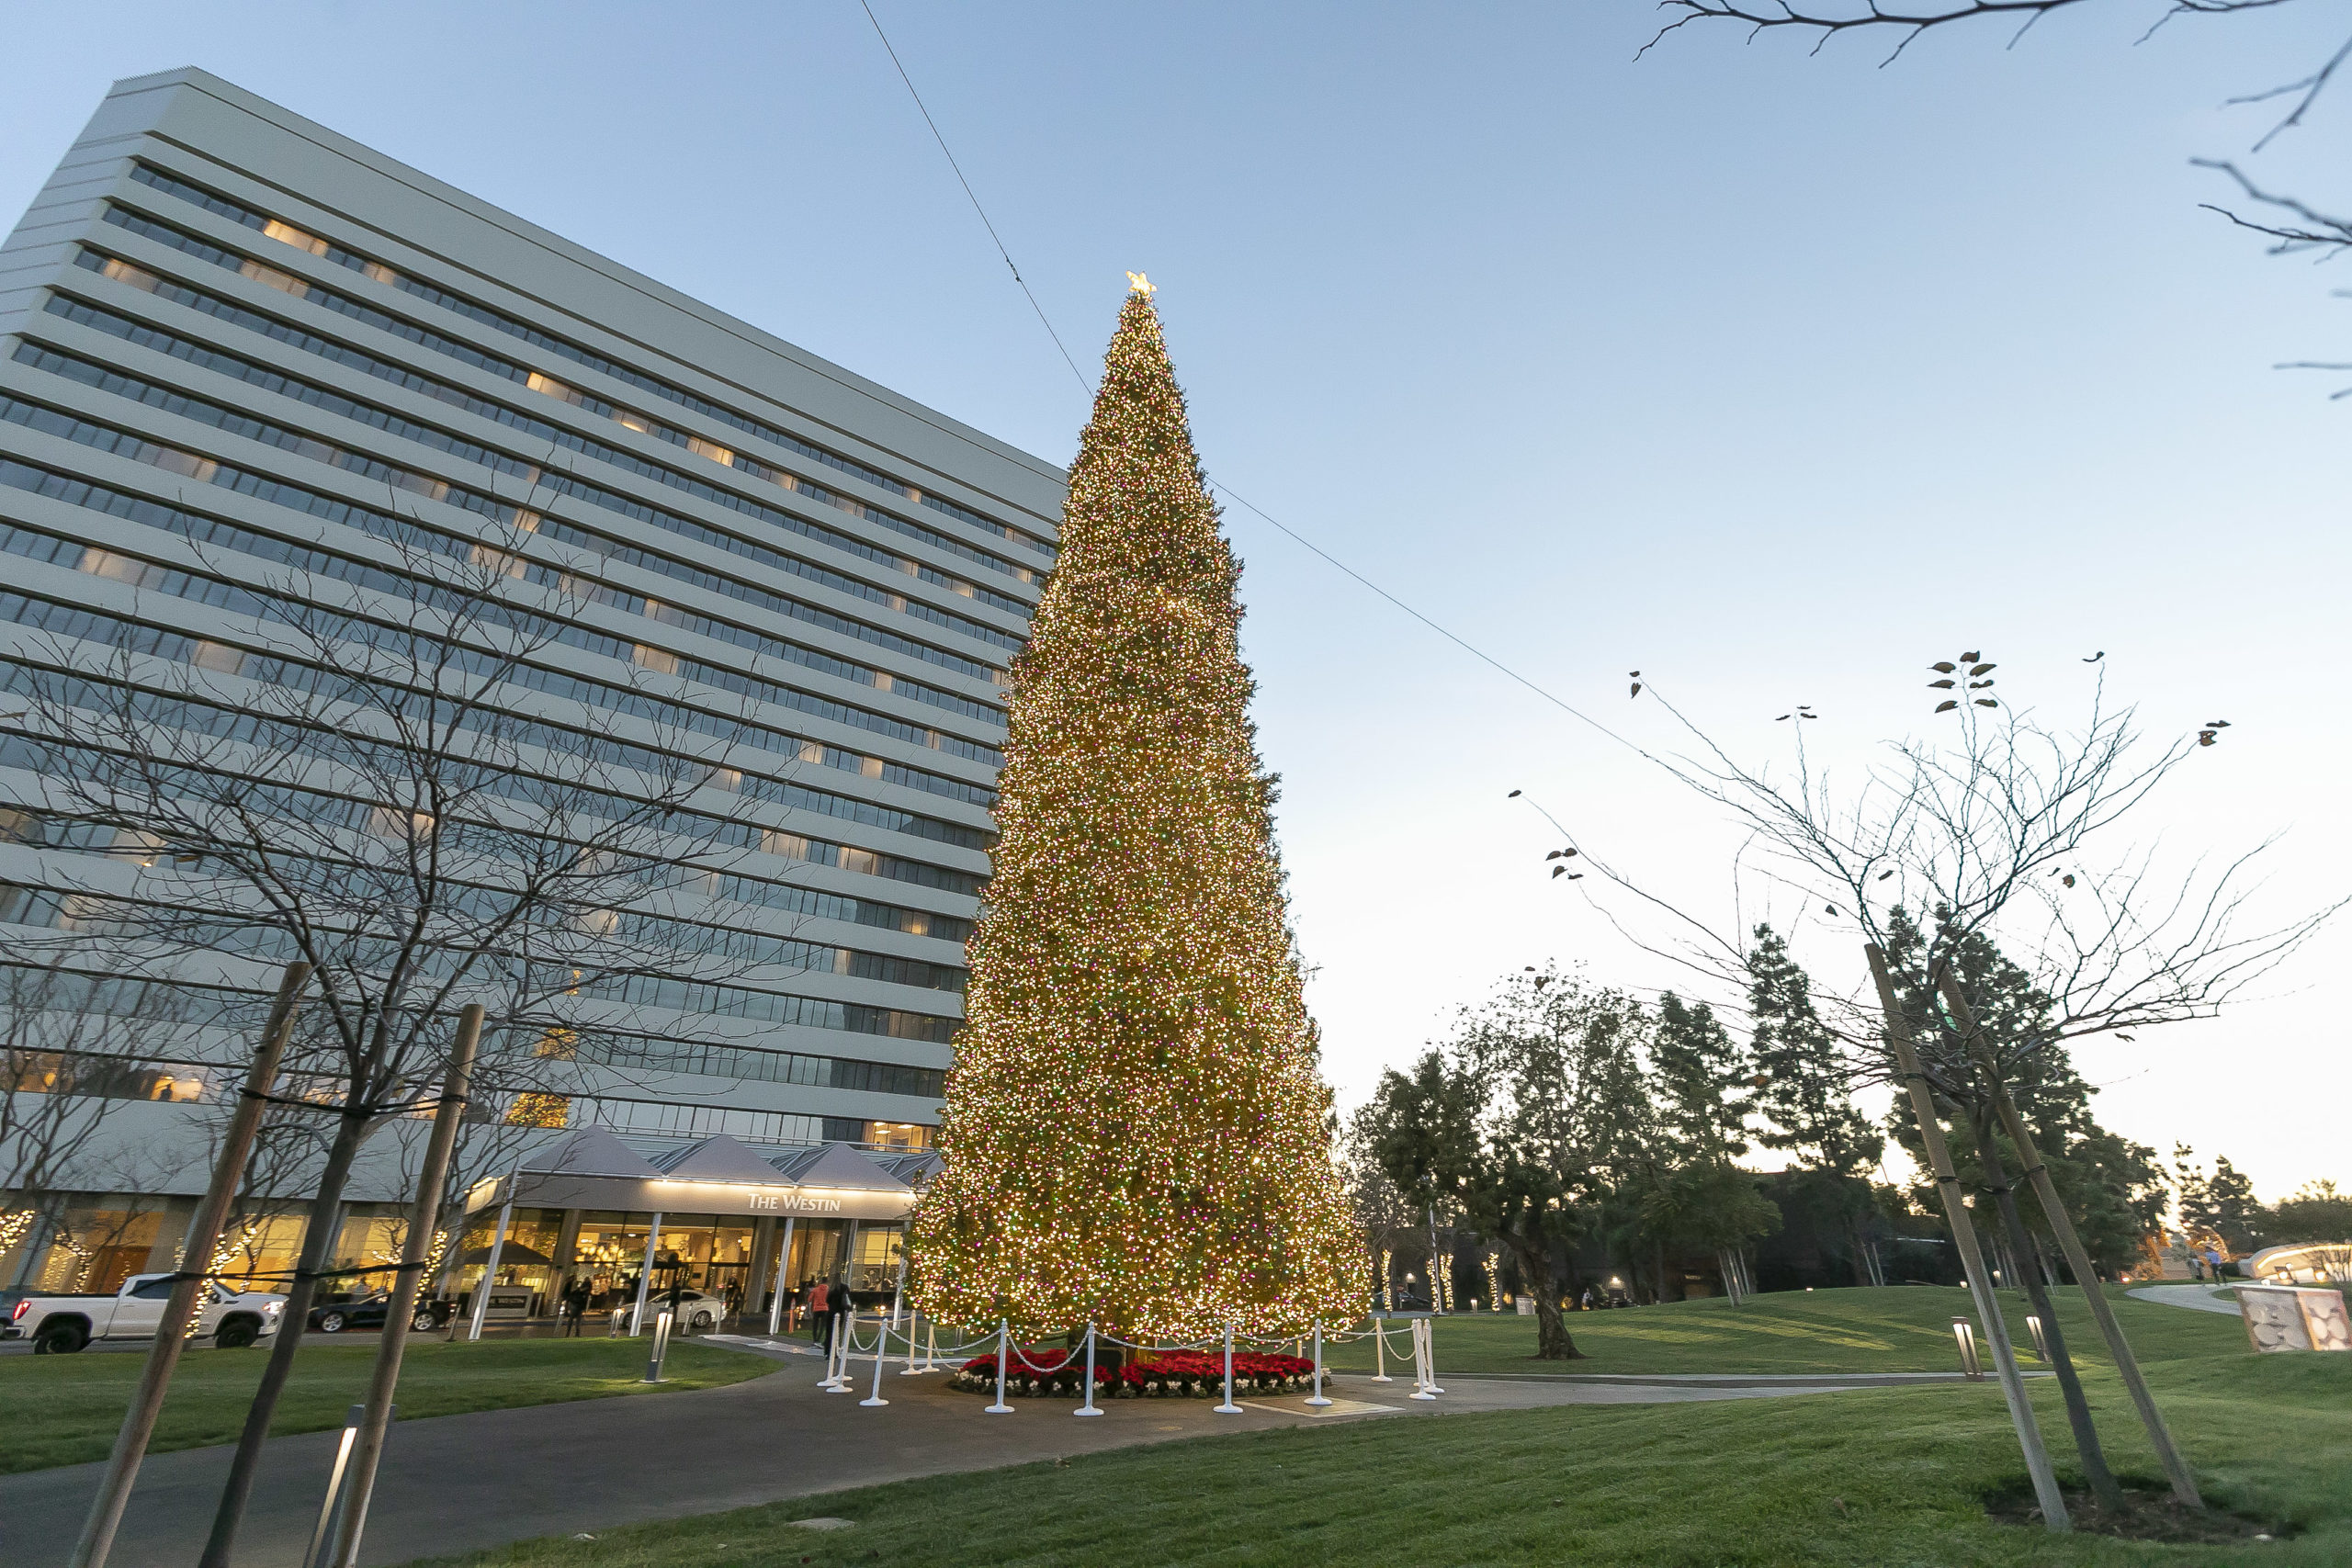 South Coast Plaza hopes to replace 96-foot Christmas tree